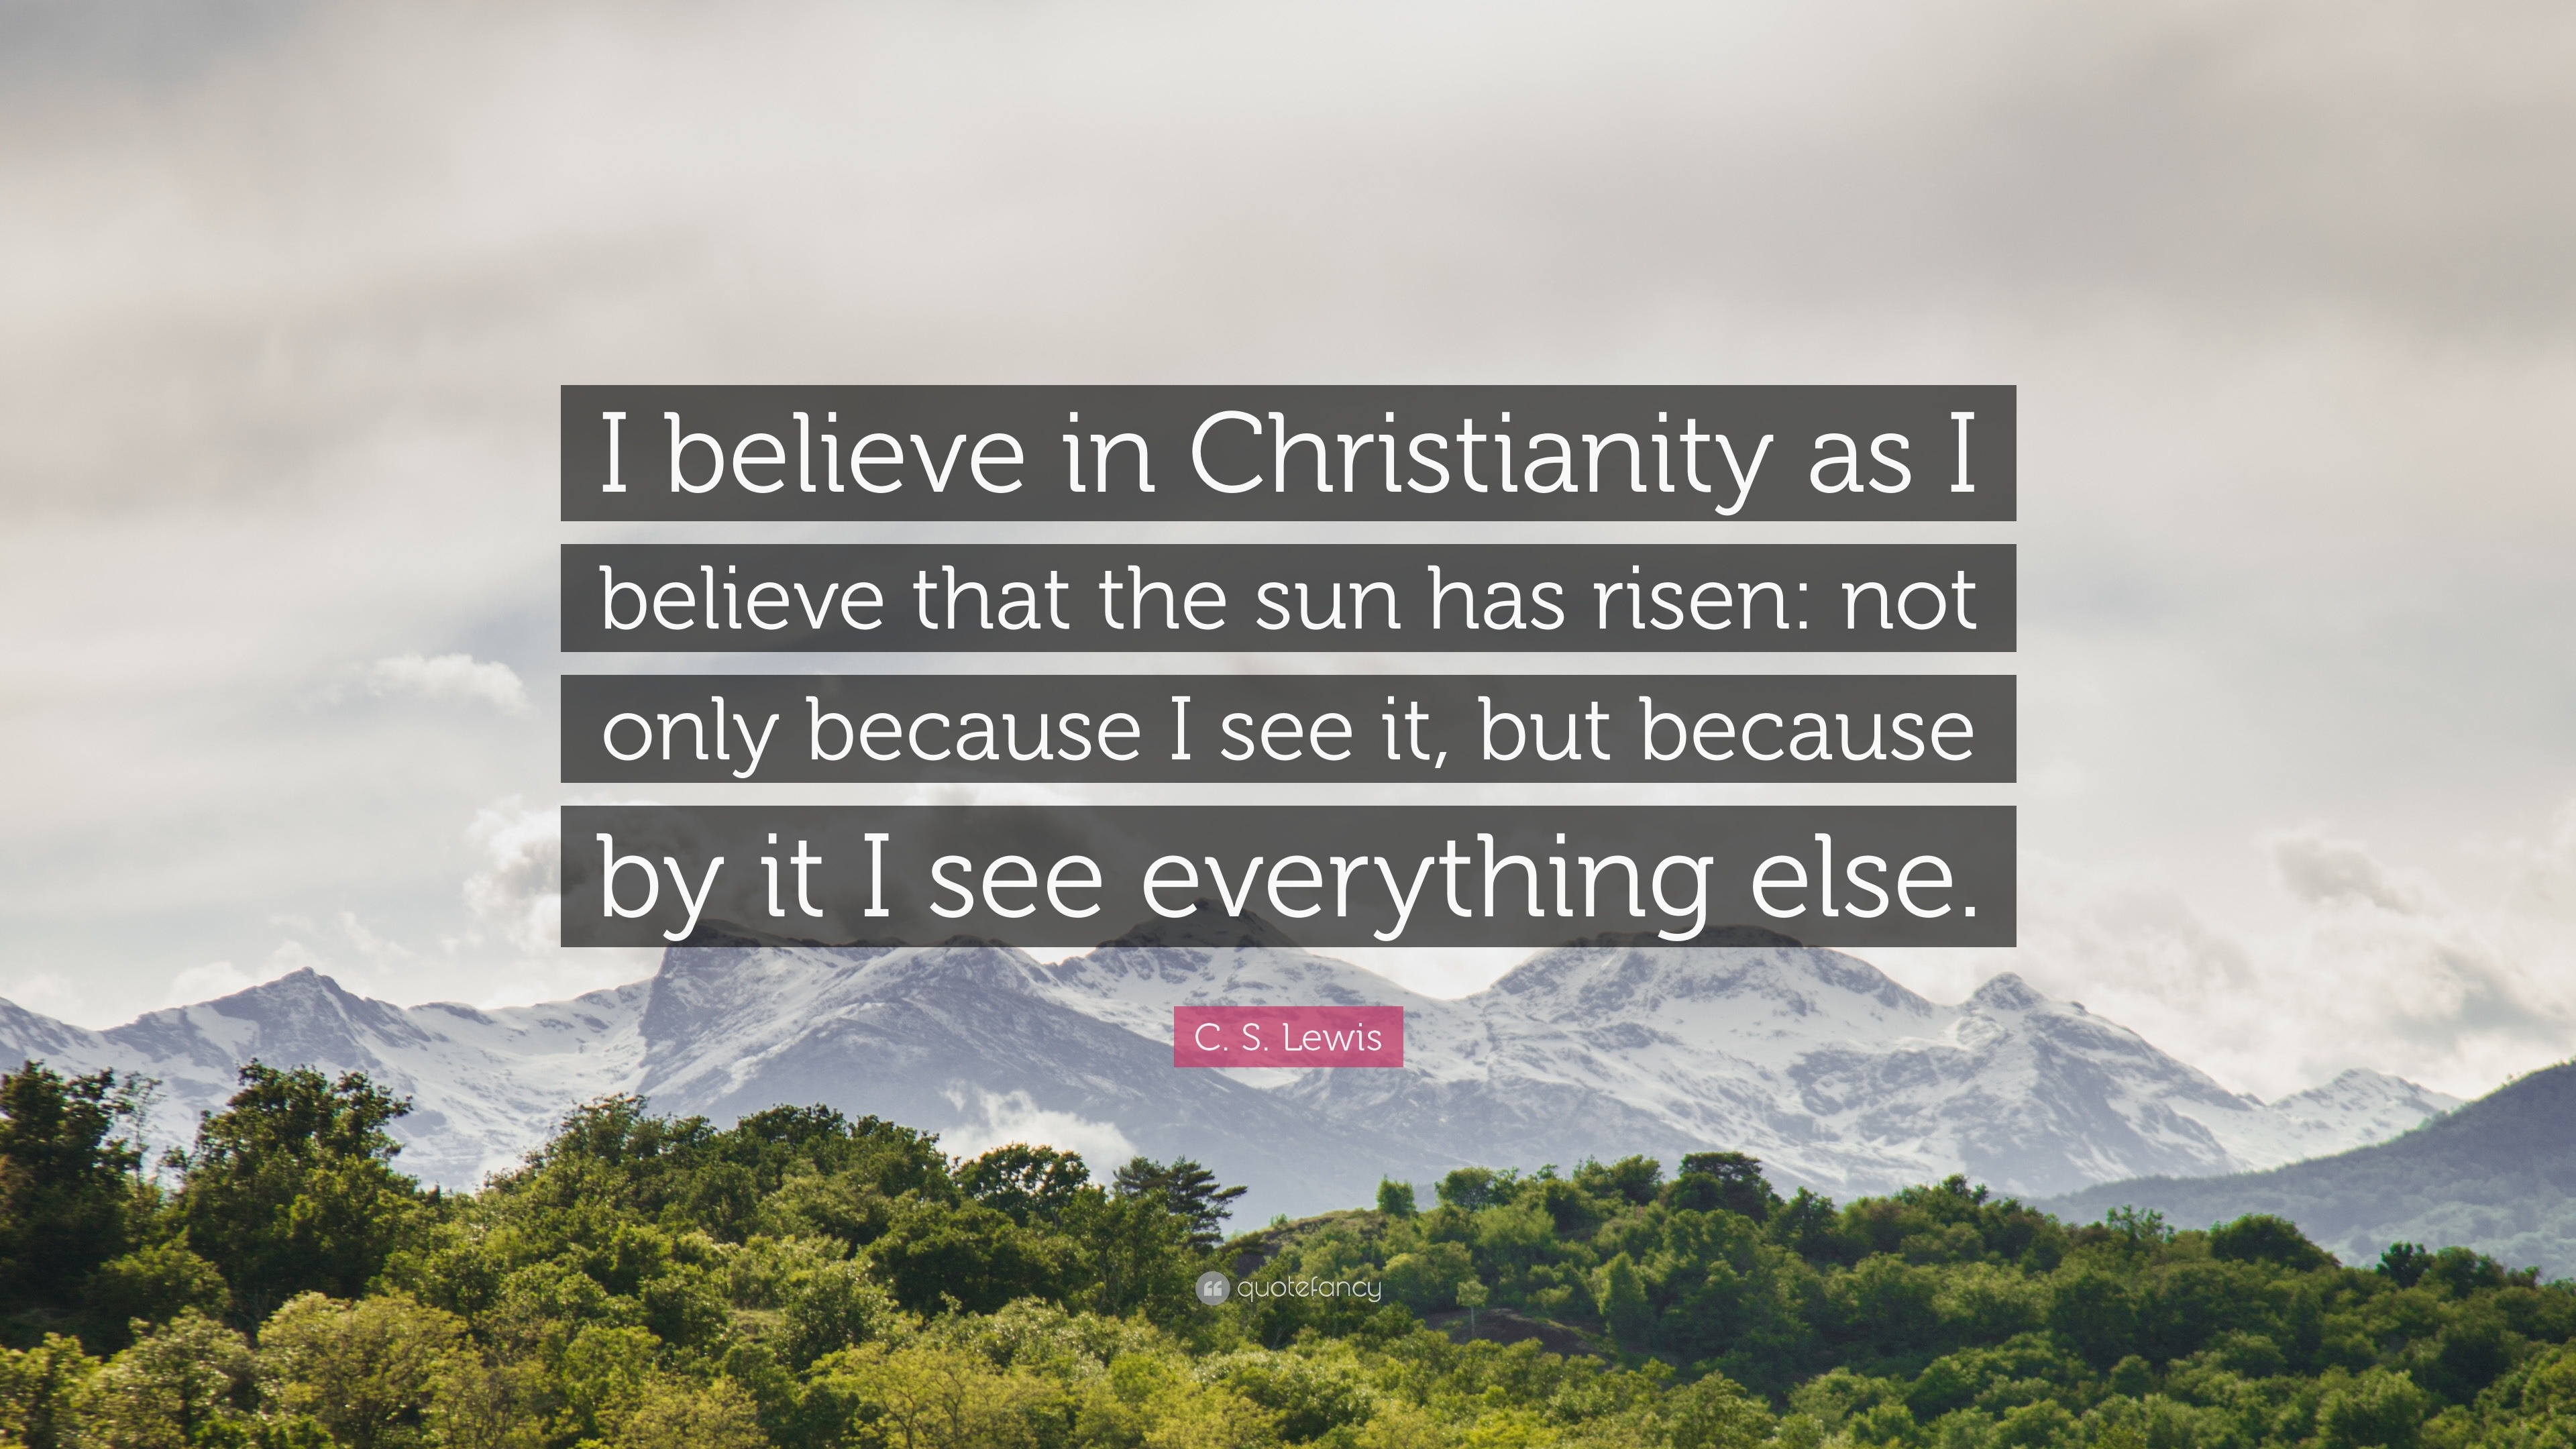 C. S. Lewis Quote “I believe in Christianity as I believe